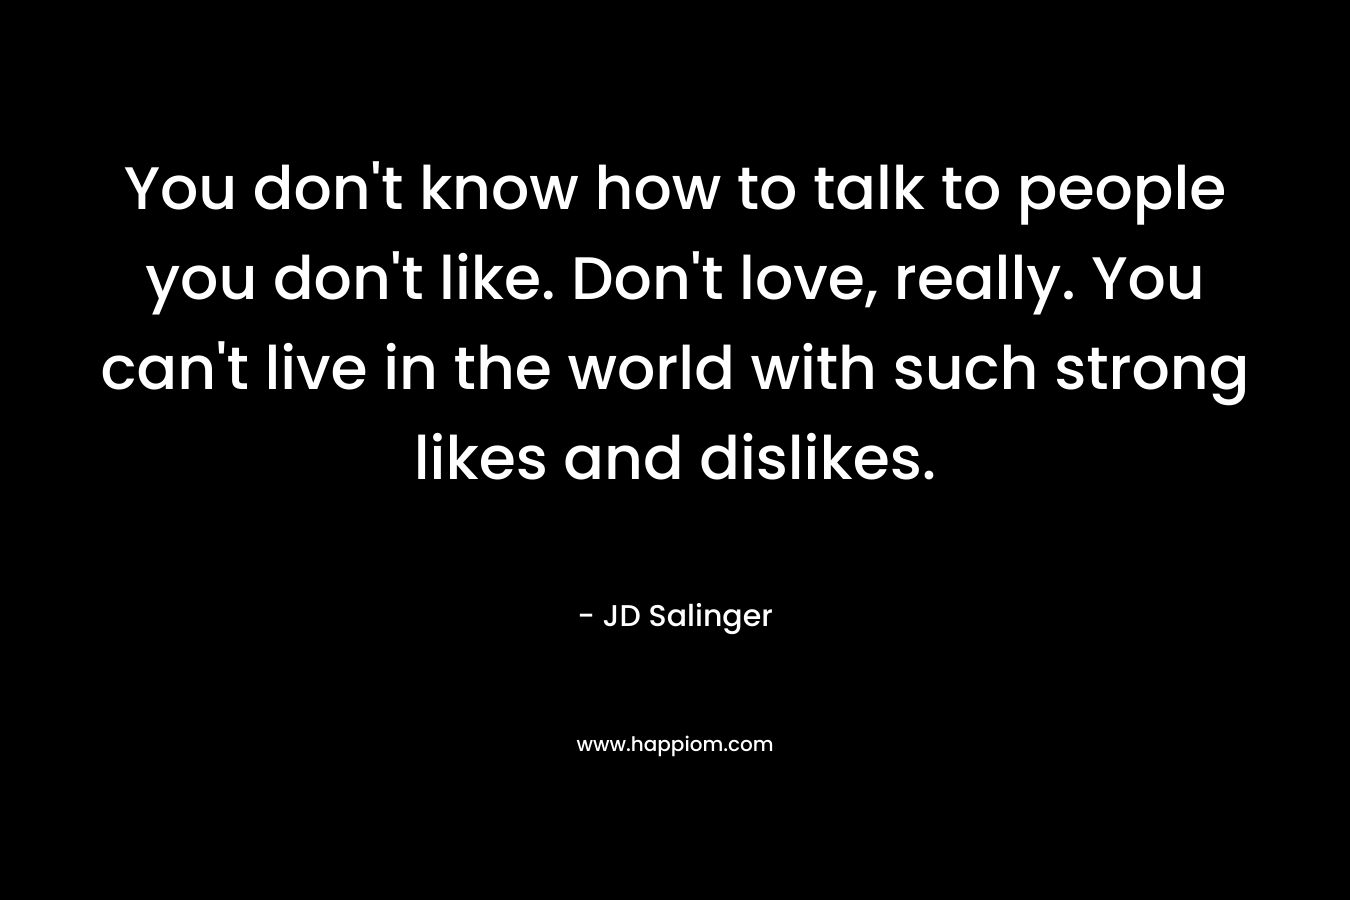 You don’t know how to talk to people you don’t like. Don’t love, really. You can’t live in the world with such strong likes and dislikes. – JD Salinger